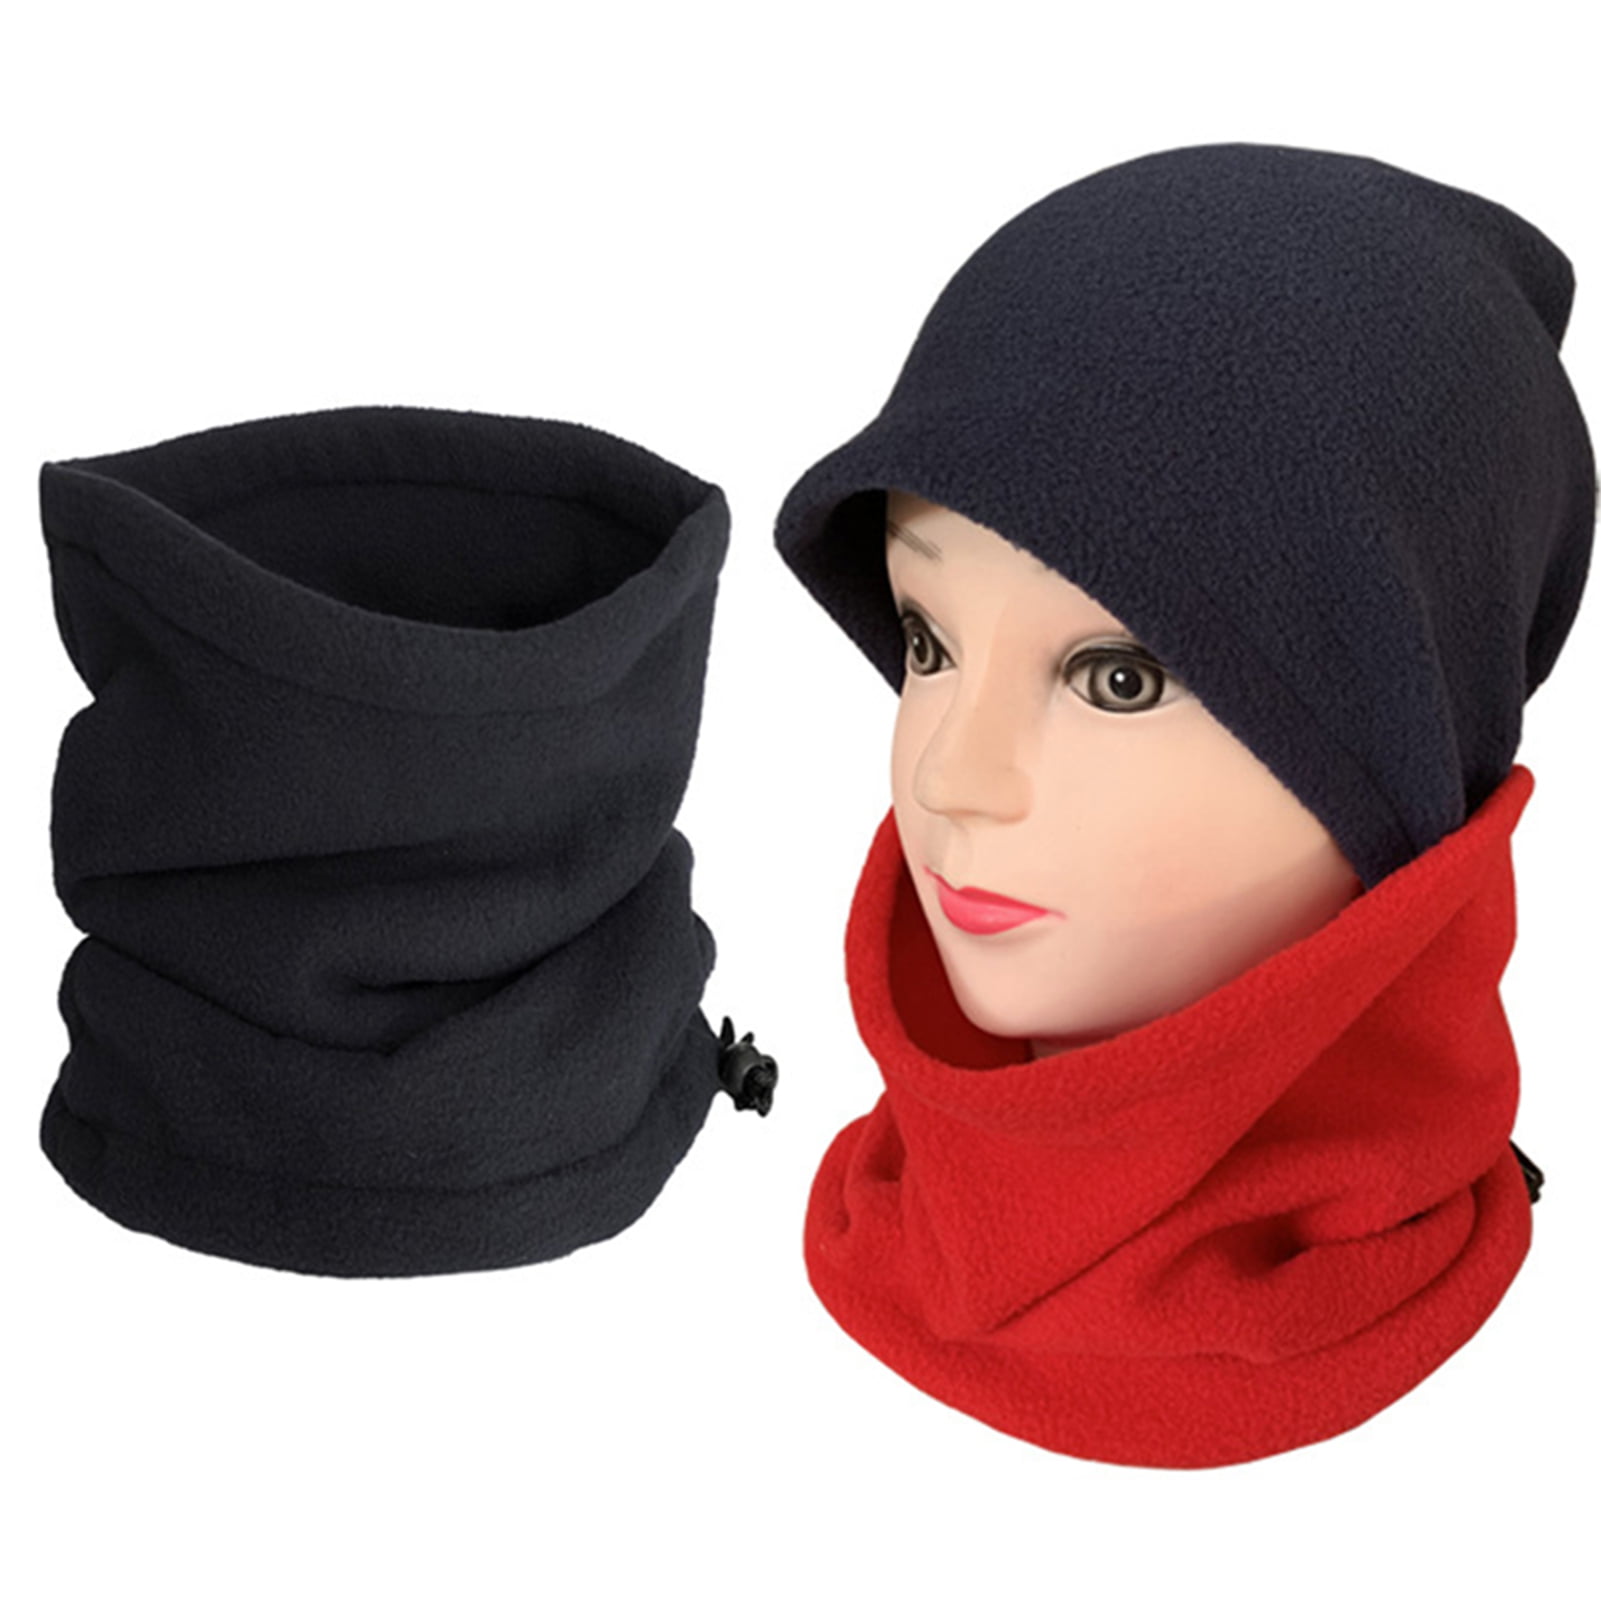 Details about   Therma Fleece Snood Scarf Winter Neck Warmers Outdoor Ski Beanie Hat Balaclava 